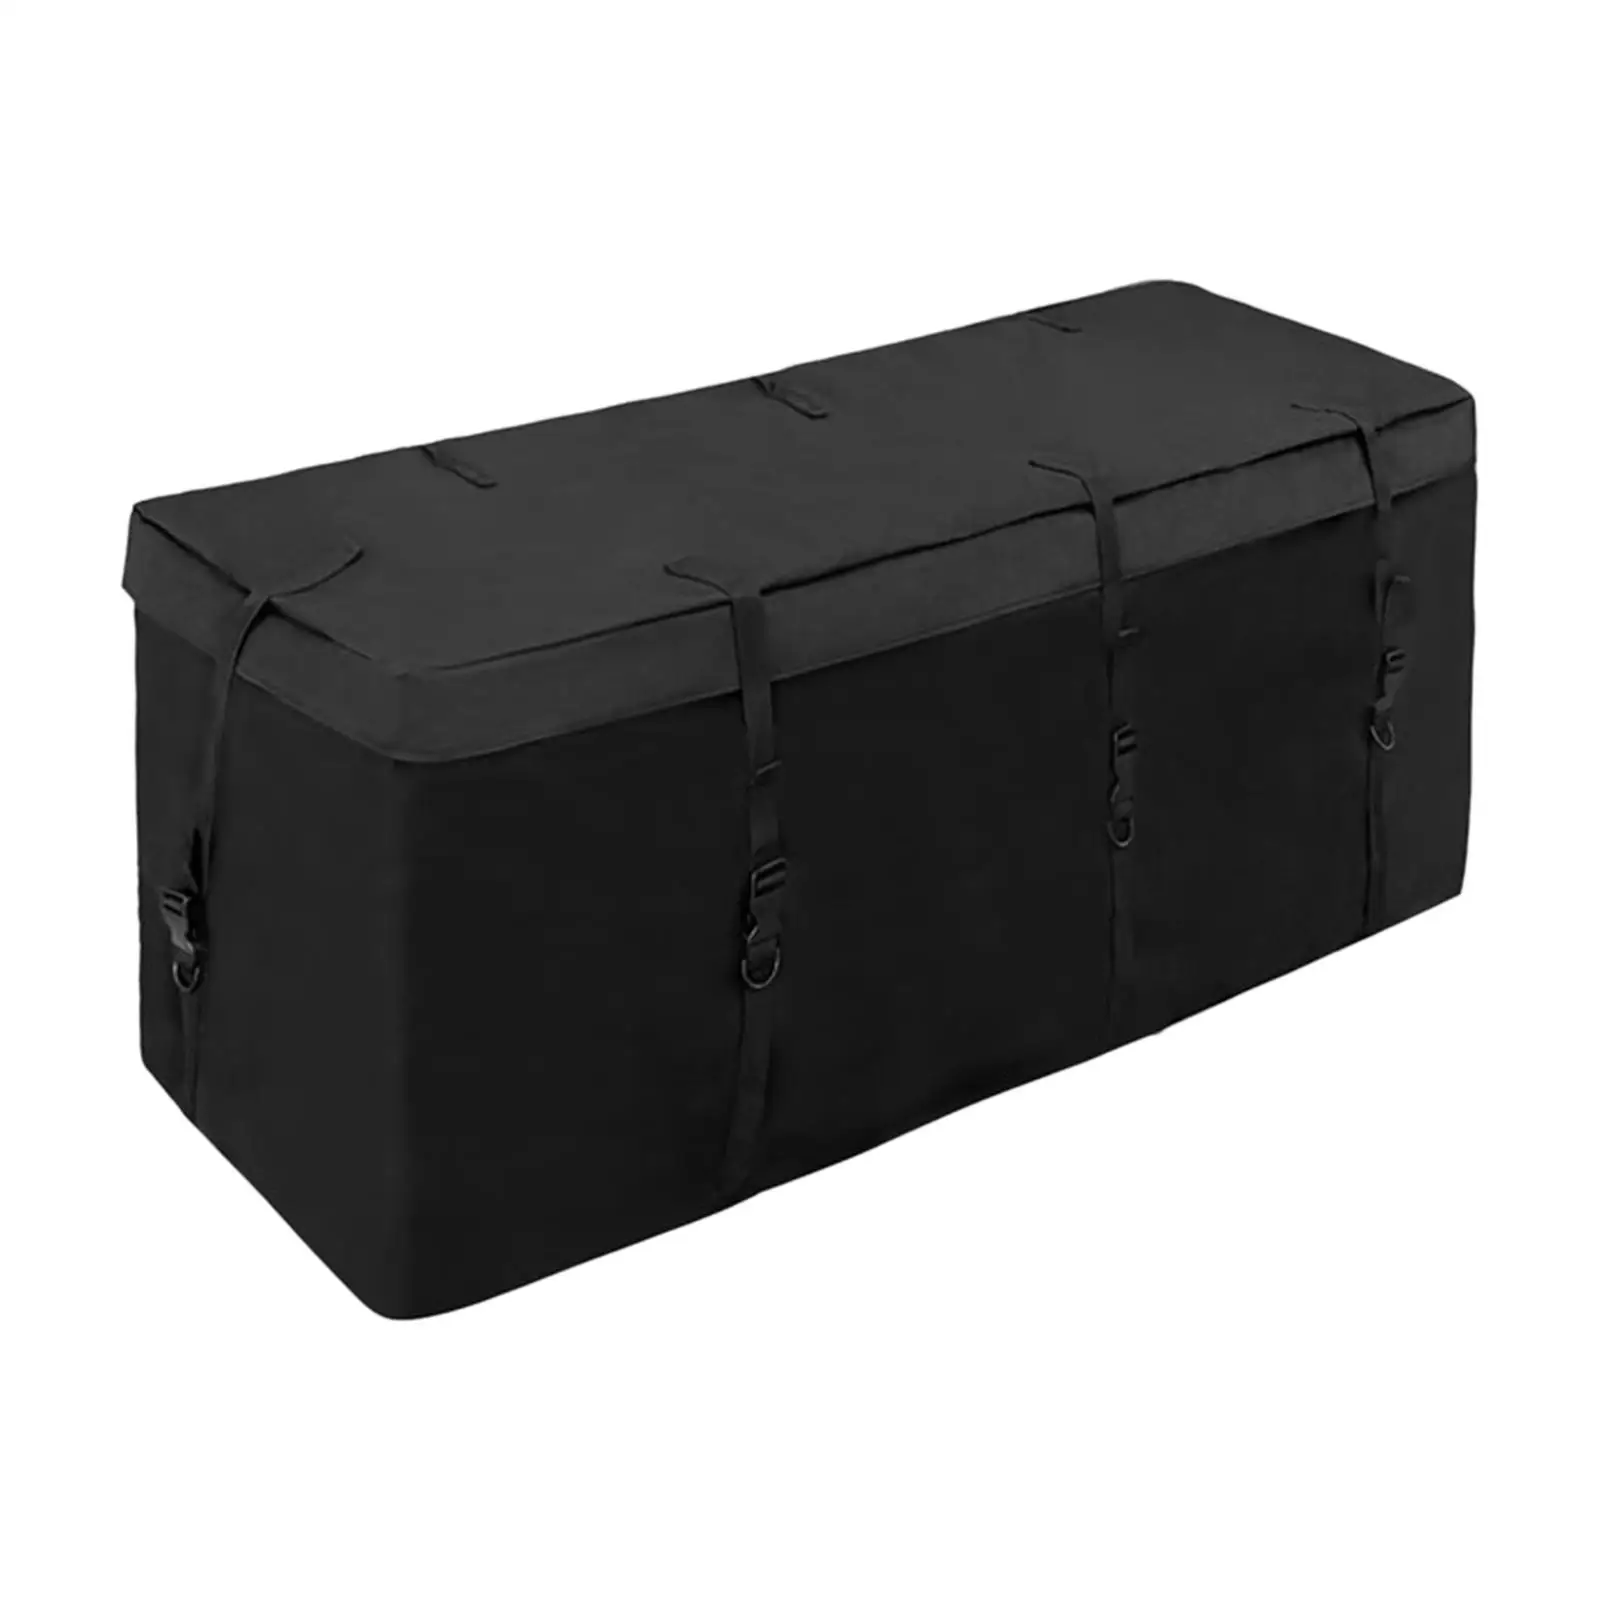 Hitch Cargo Carrier Bag Heavy Duty Black Luggage Storage Rooftop Cargo Carrier Bag for All Vehicle Travel SUV Car Trailer